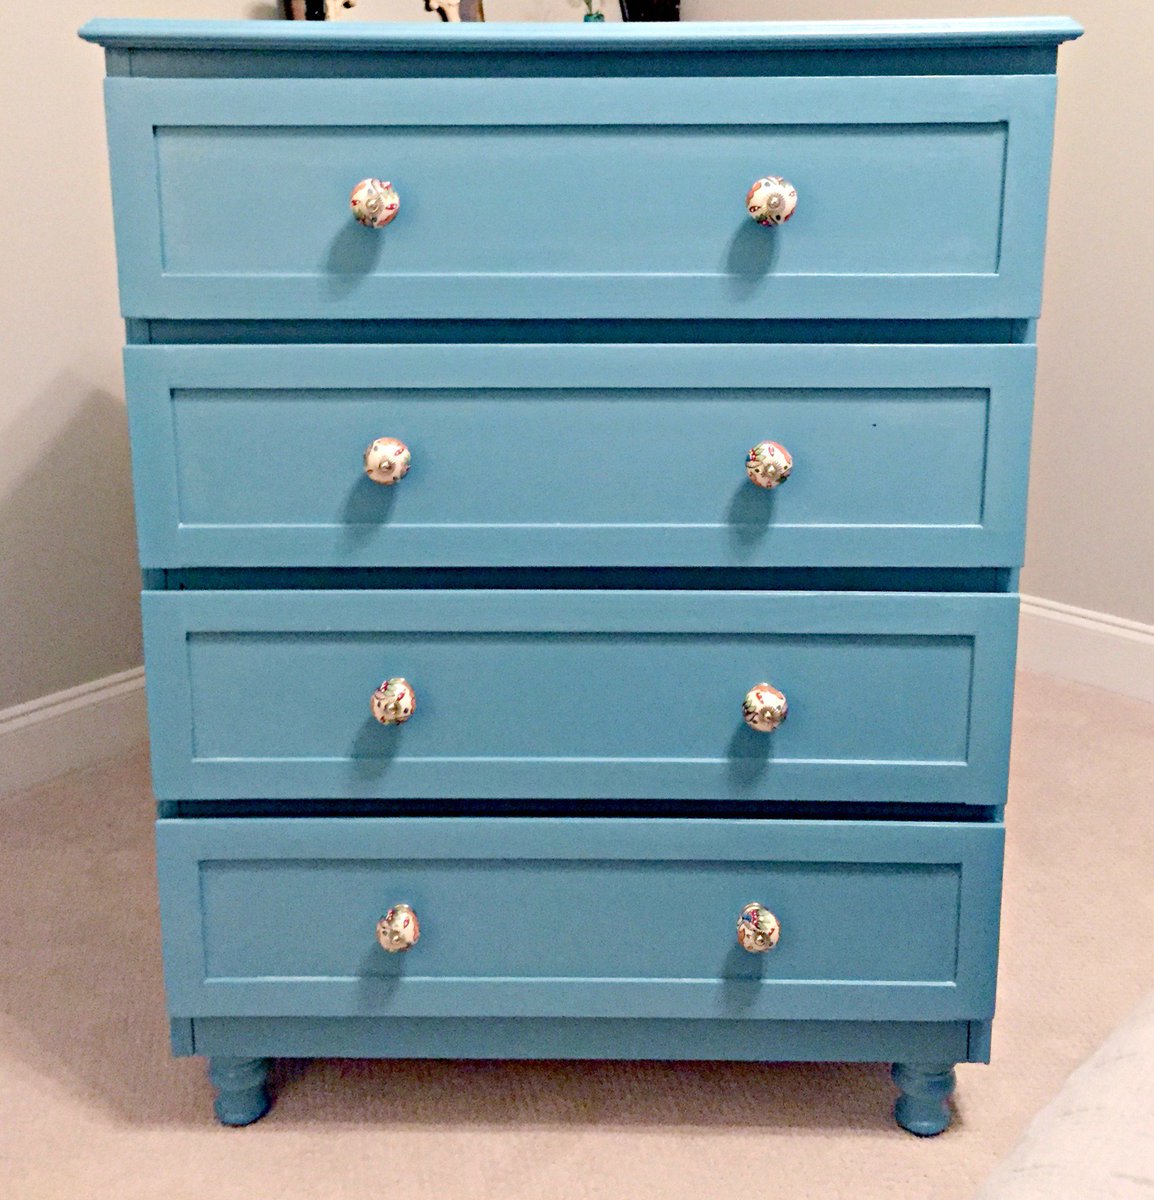 Susie P On Twitter The Ikea Malm Dresser Transformed Added